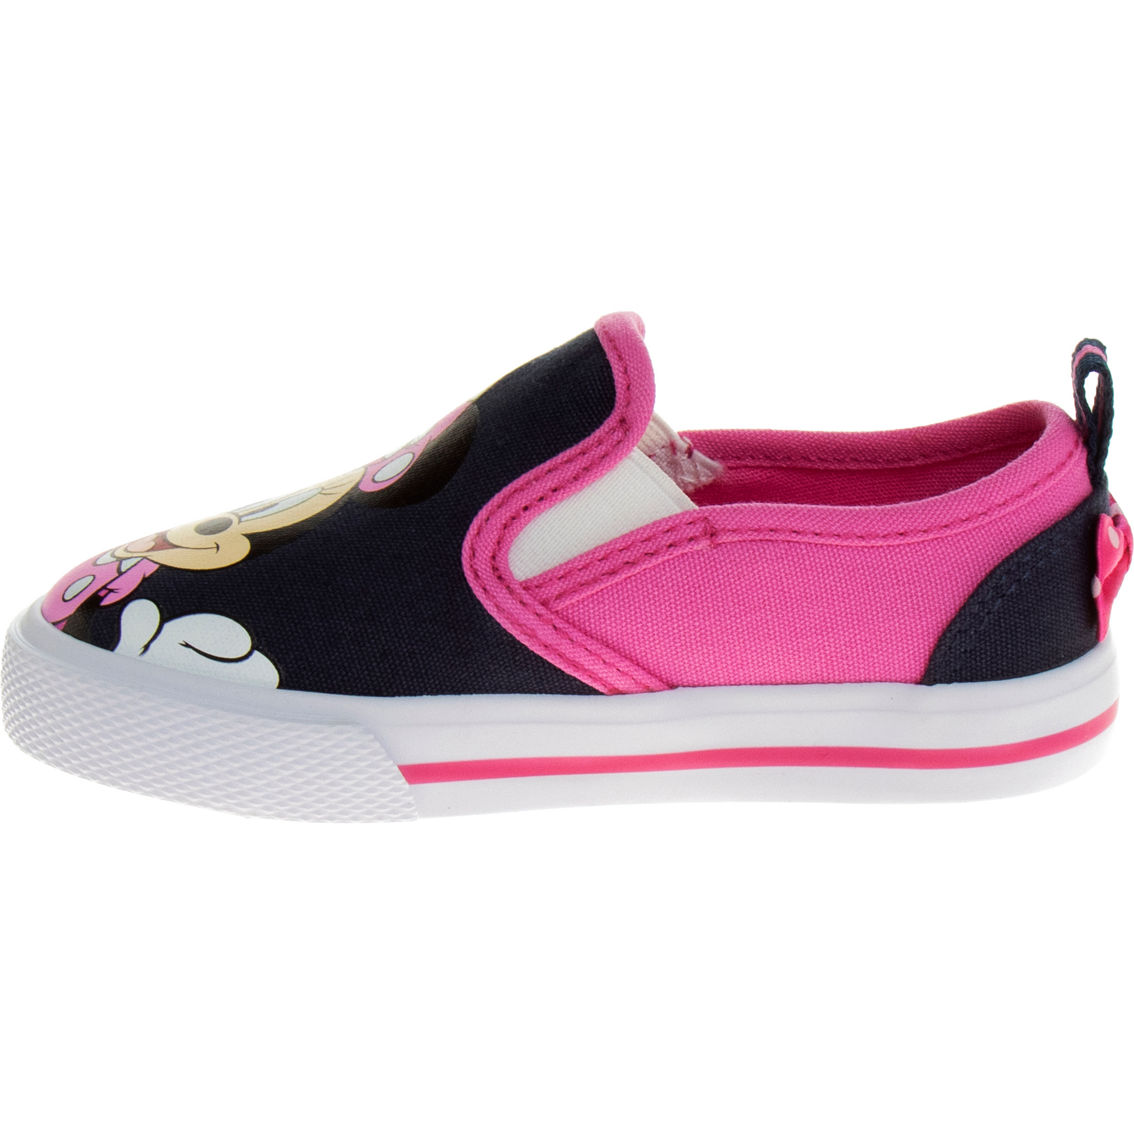 Disney Minnie Mouse Toddler Girls Slip On Sneakers | Sneakers | Shoes ...